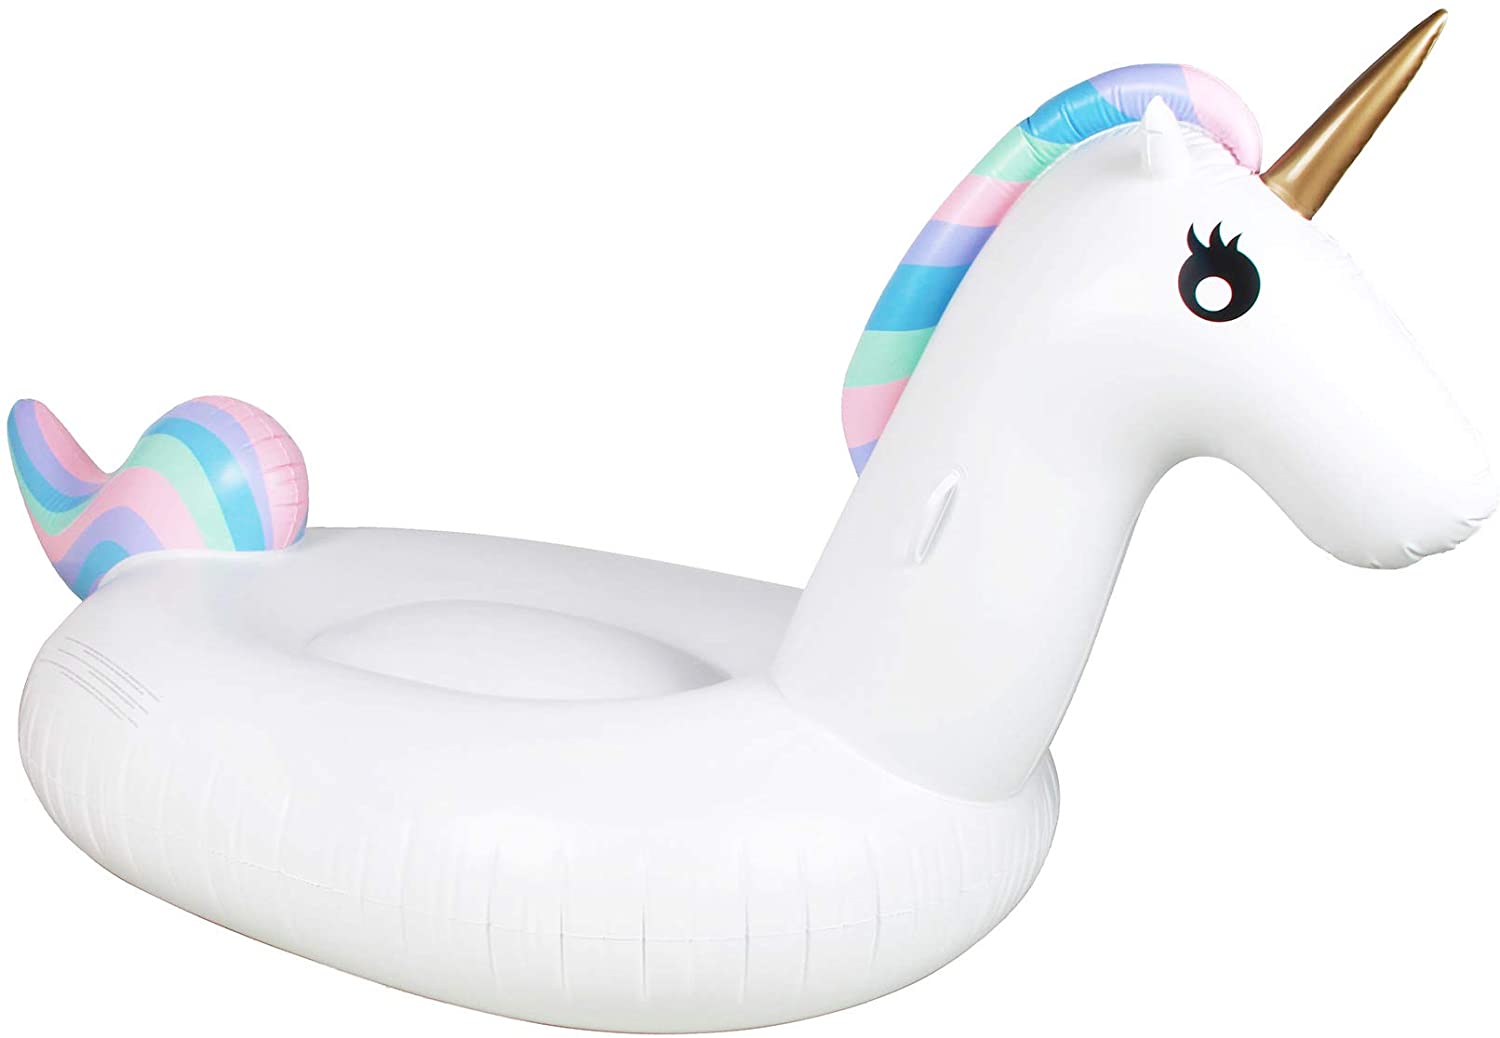 Enormous Ride On Pool Float Unicorn - Over 8' long - Ages 8+